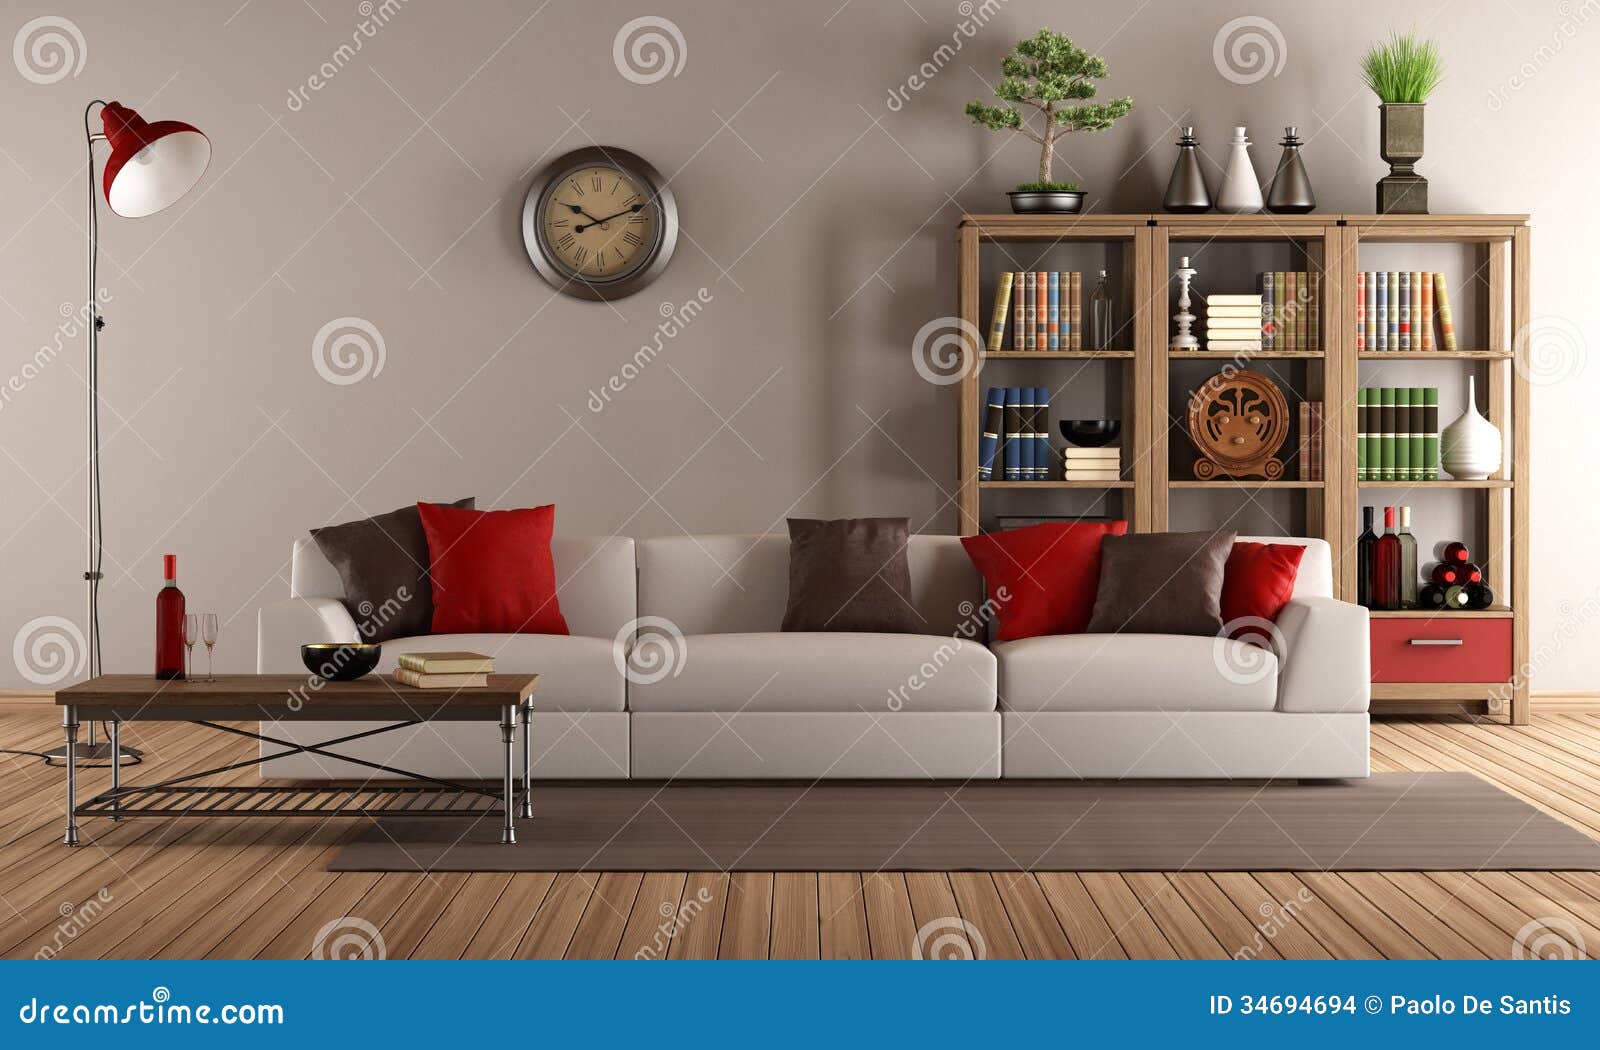 Modern Sofa In A Vintage Living Room Stock Images - Image: 34694694